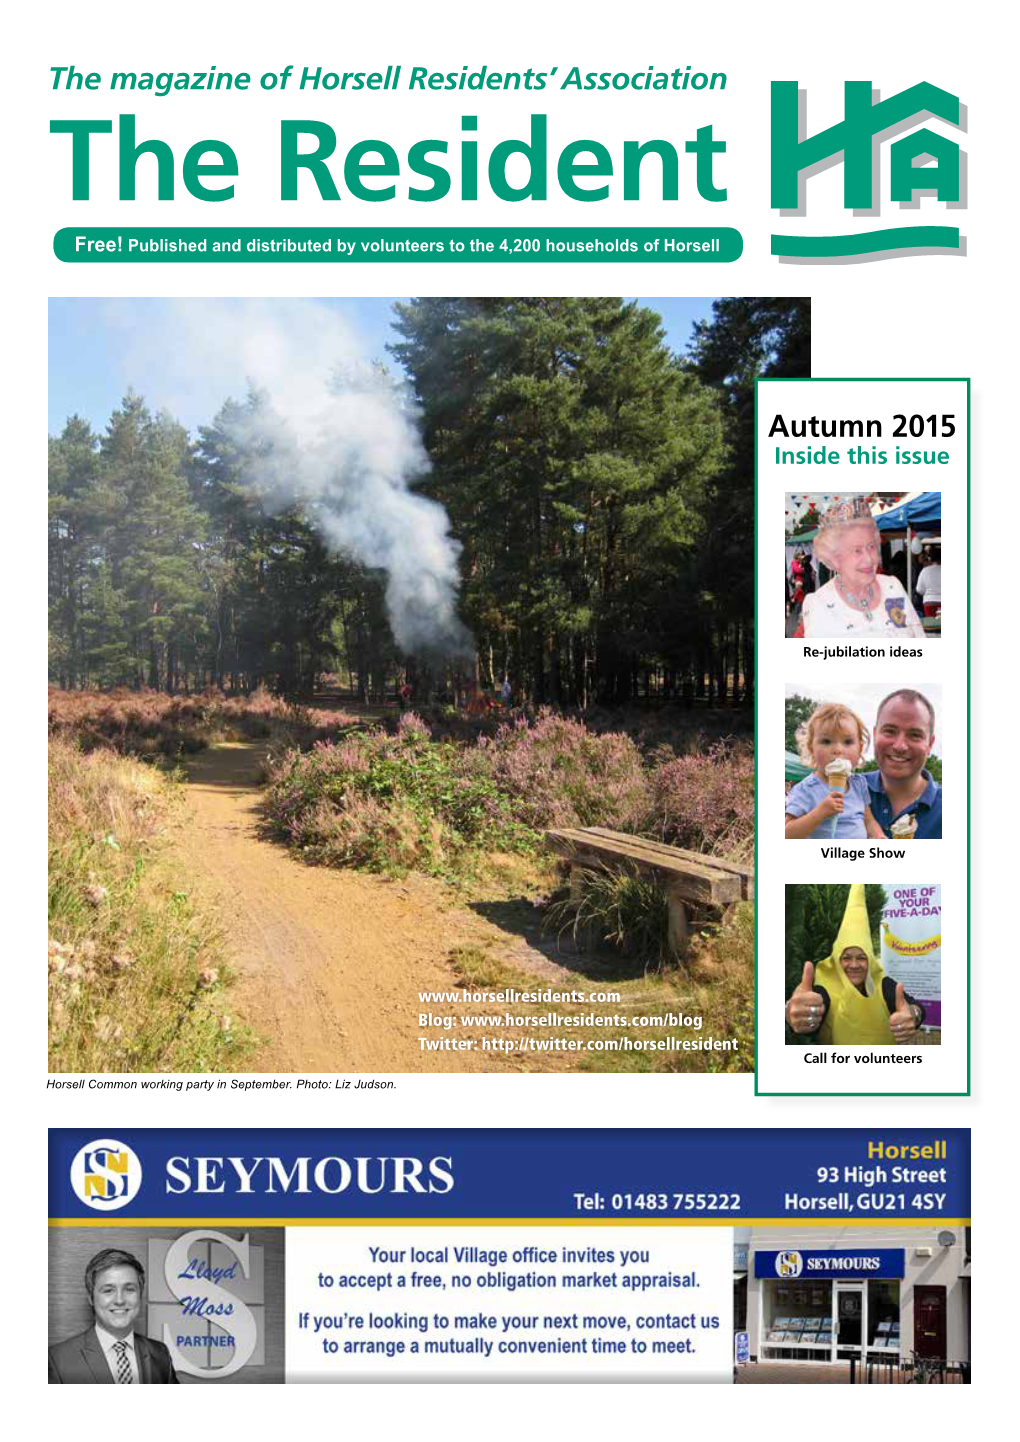 The Resident Free! Published and Distributed by Volunteers to the 4,200 Households of Horsell